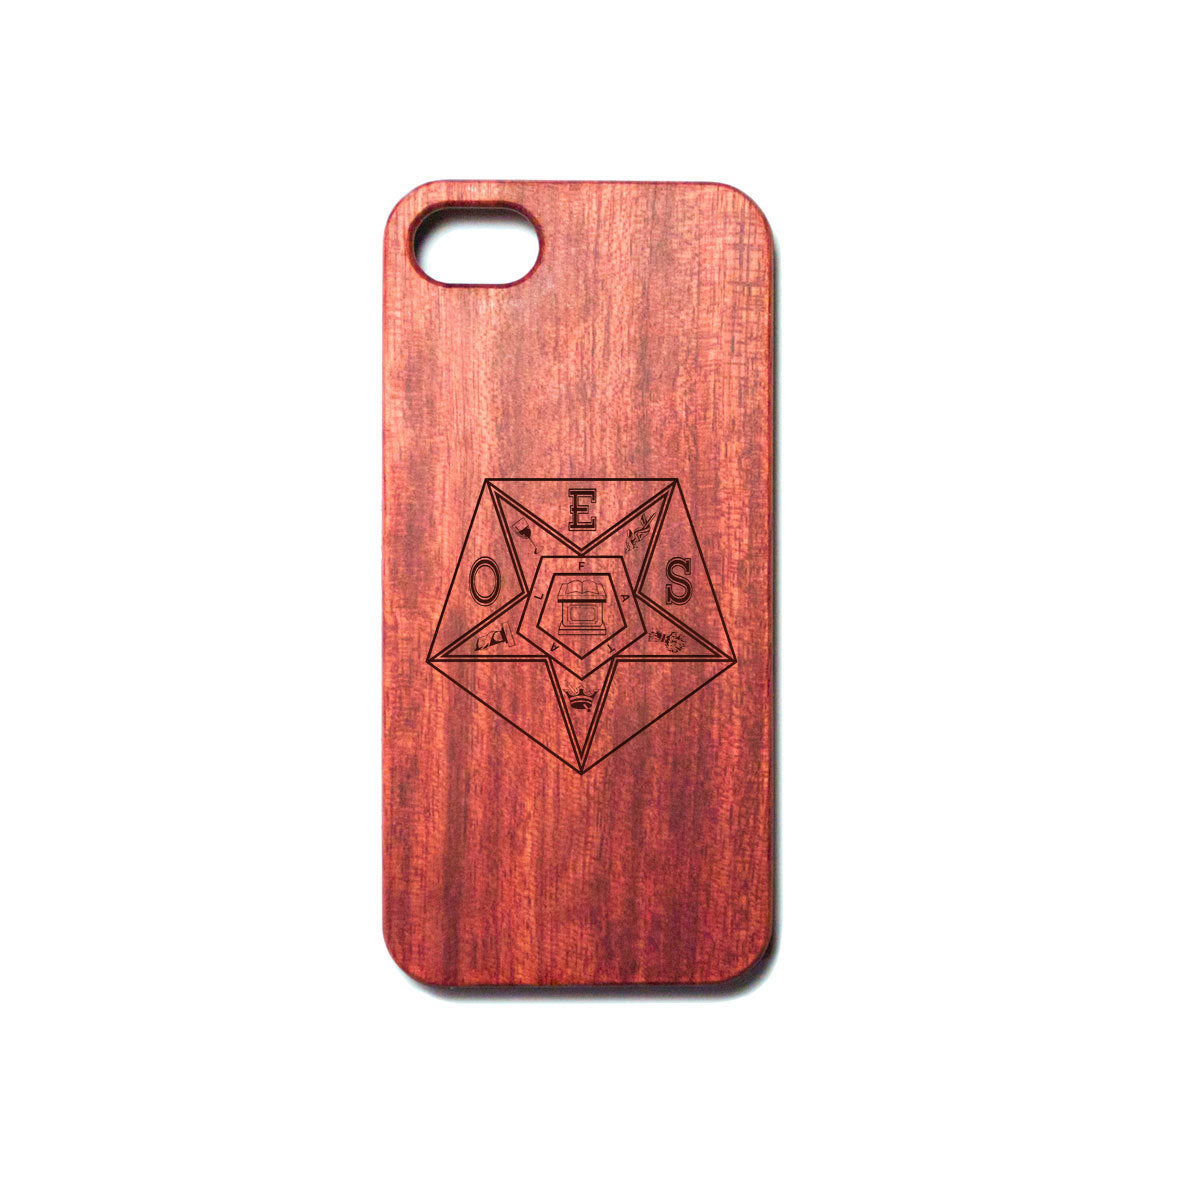 OES Rosewood iPhone Case - JaZazzy 